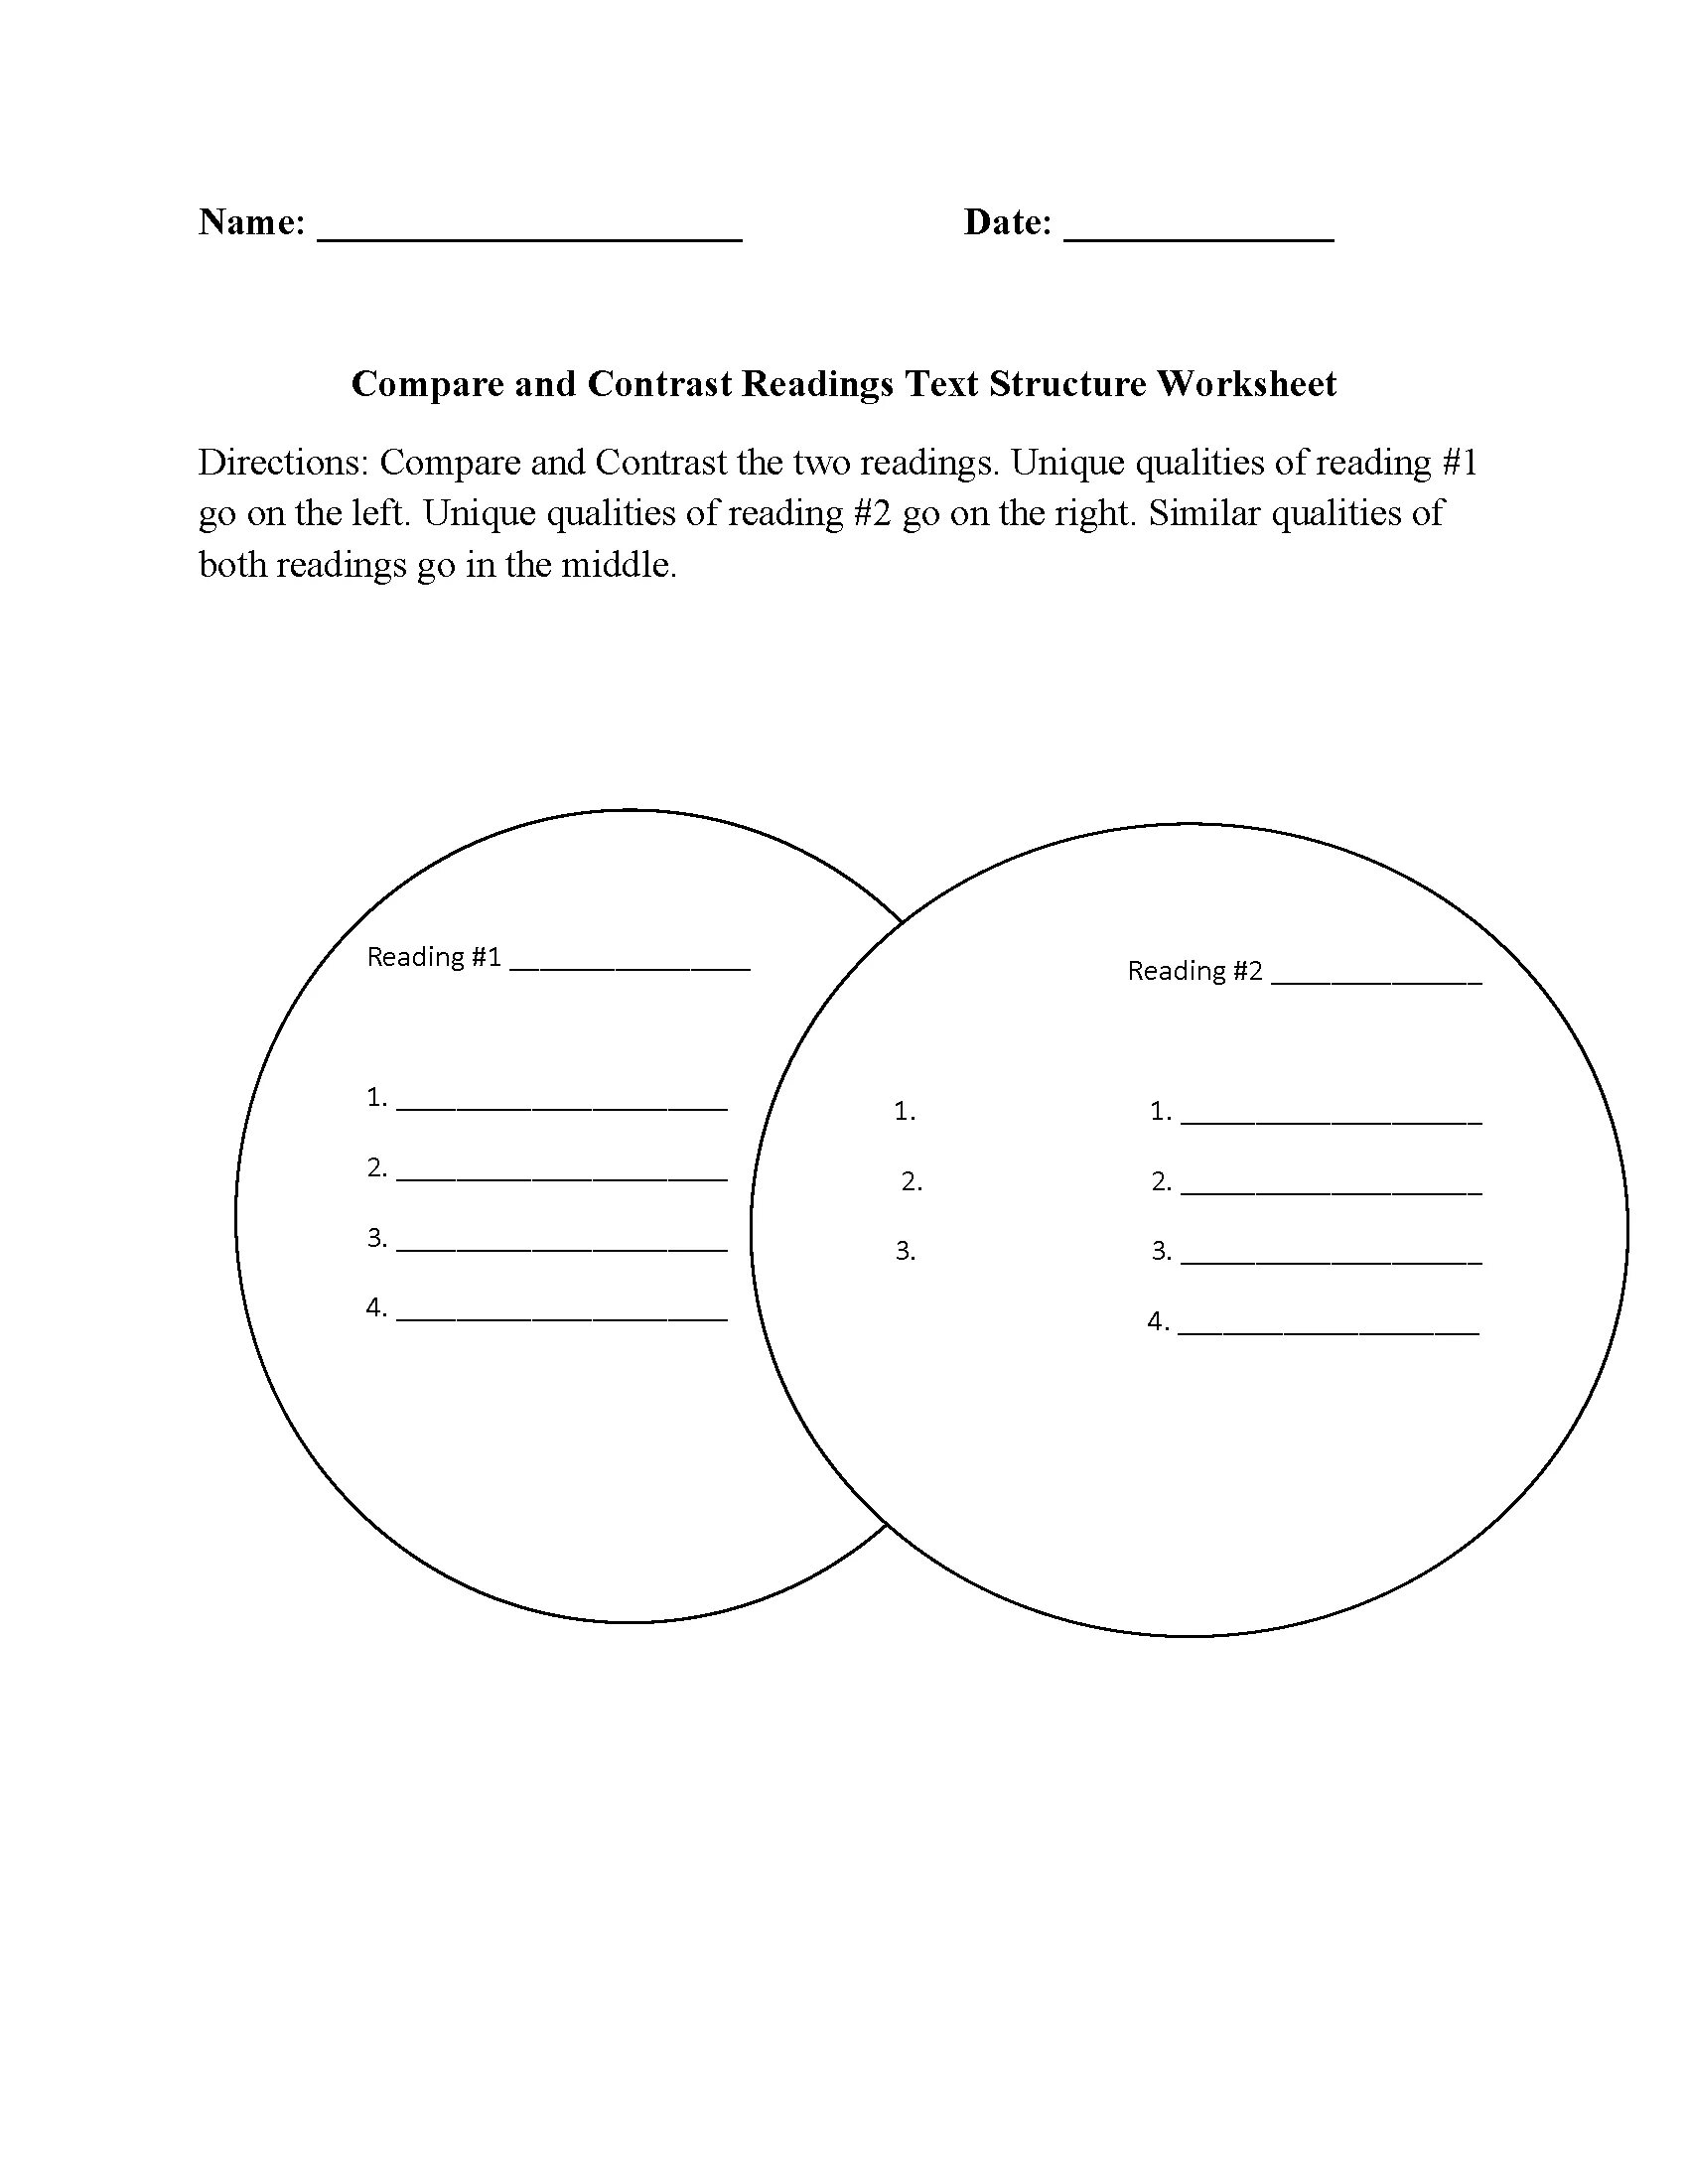 Compare and contrast Worksheets. Venn diagram Worksheet. Literature and language Worksheet. Comparing and contrasting Worksheet. Datetime compare